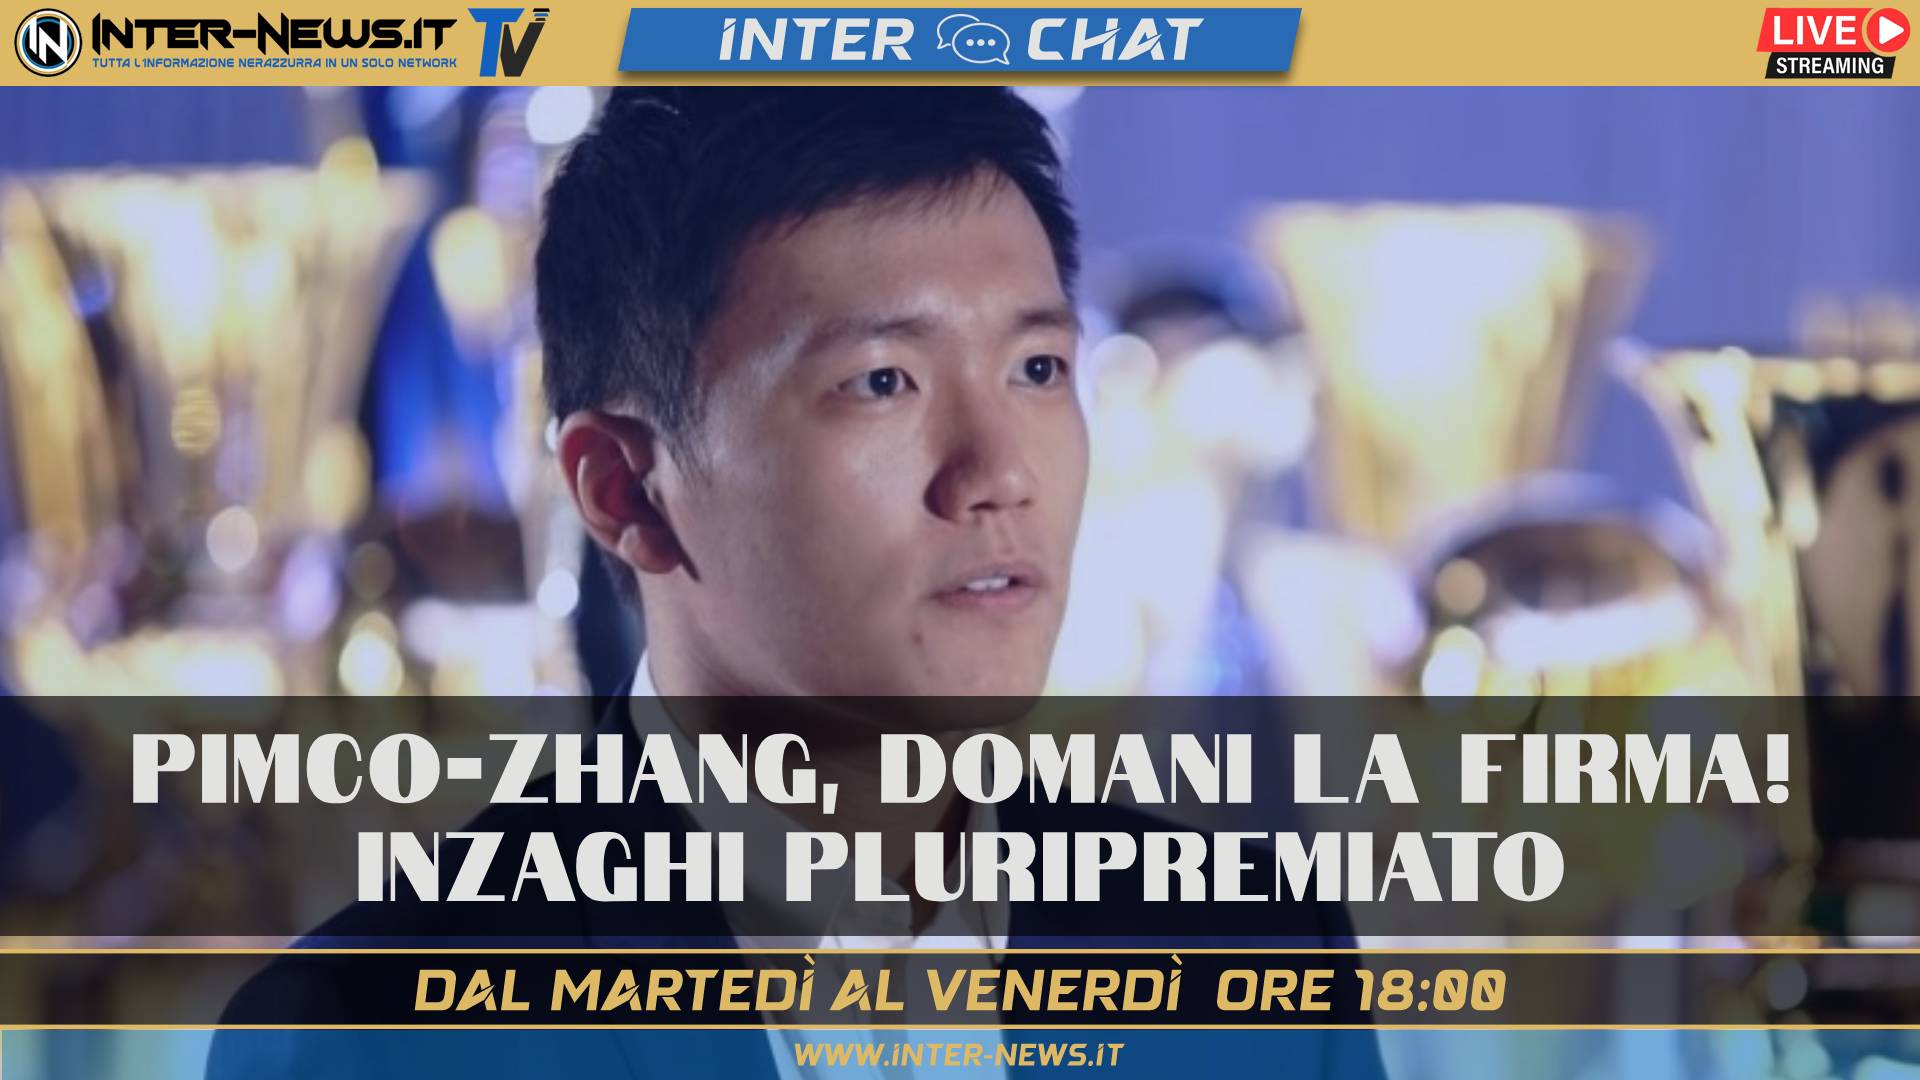 VIDEO – Pimco Zhang alle firme! Inzaghi pluripremiato | Inter Chat